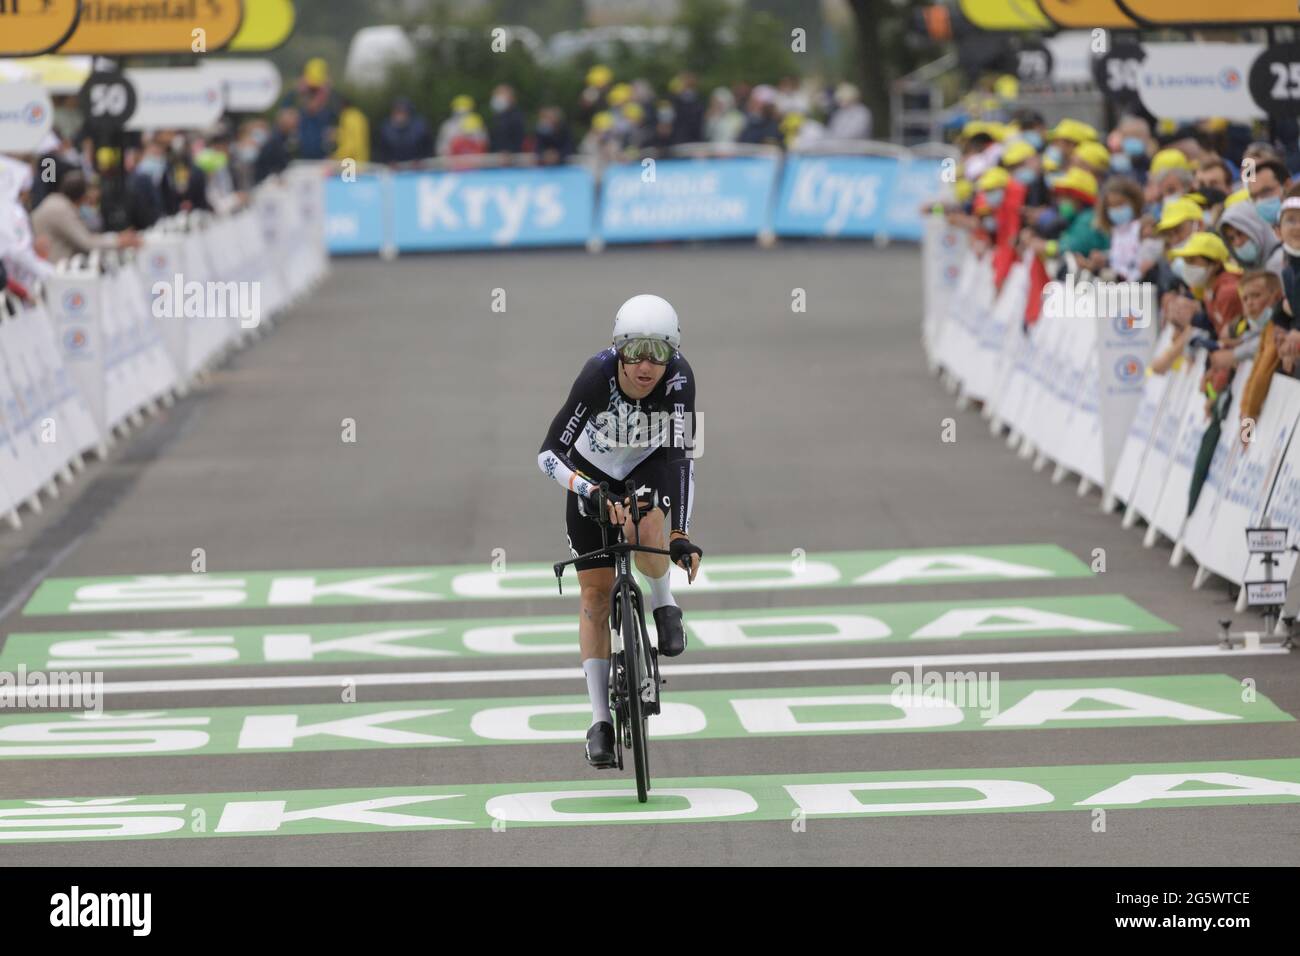 Laval, France. 30 June 2021. Simon Clarke at the arrival of the stage 5 time trial of the Tour de France 2021 cycle race in Laval, France. Julian Elliott News Photography Stock Photo